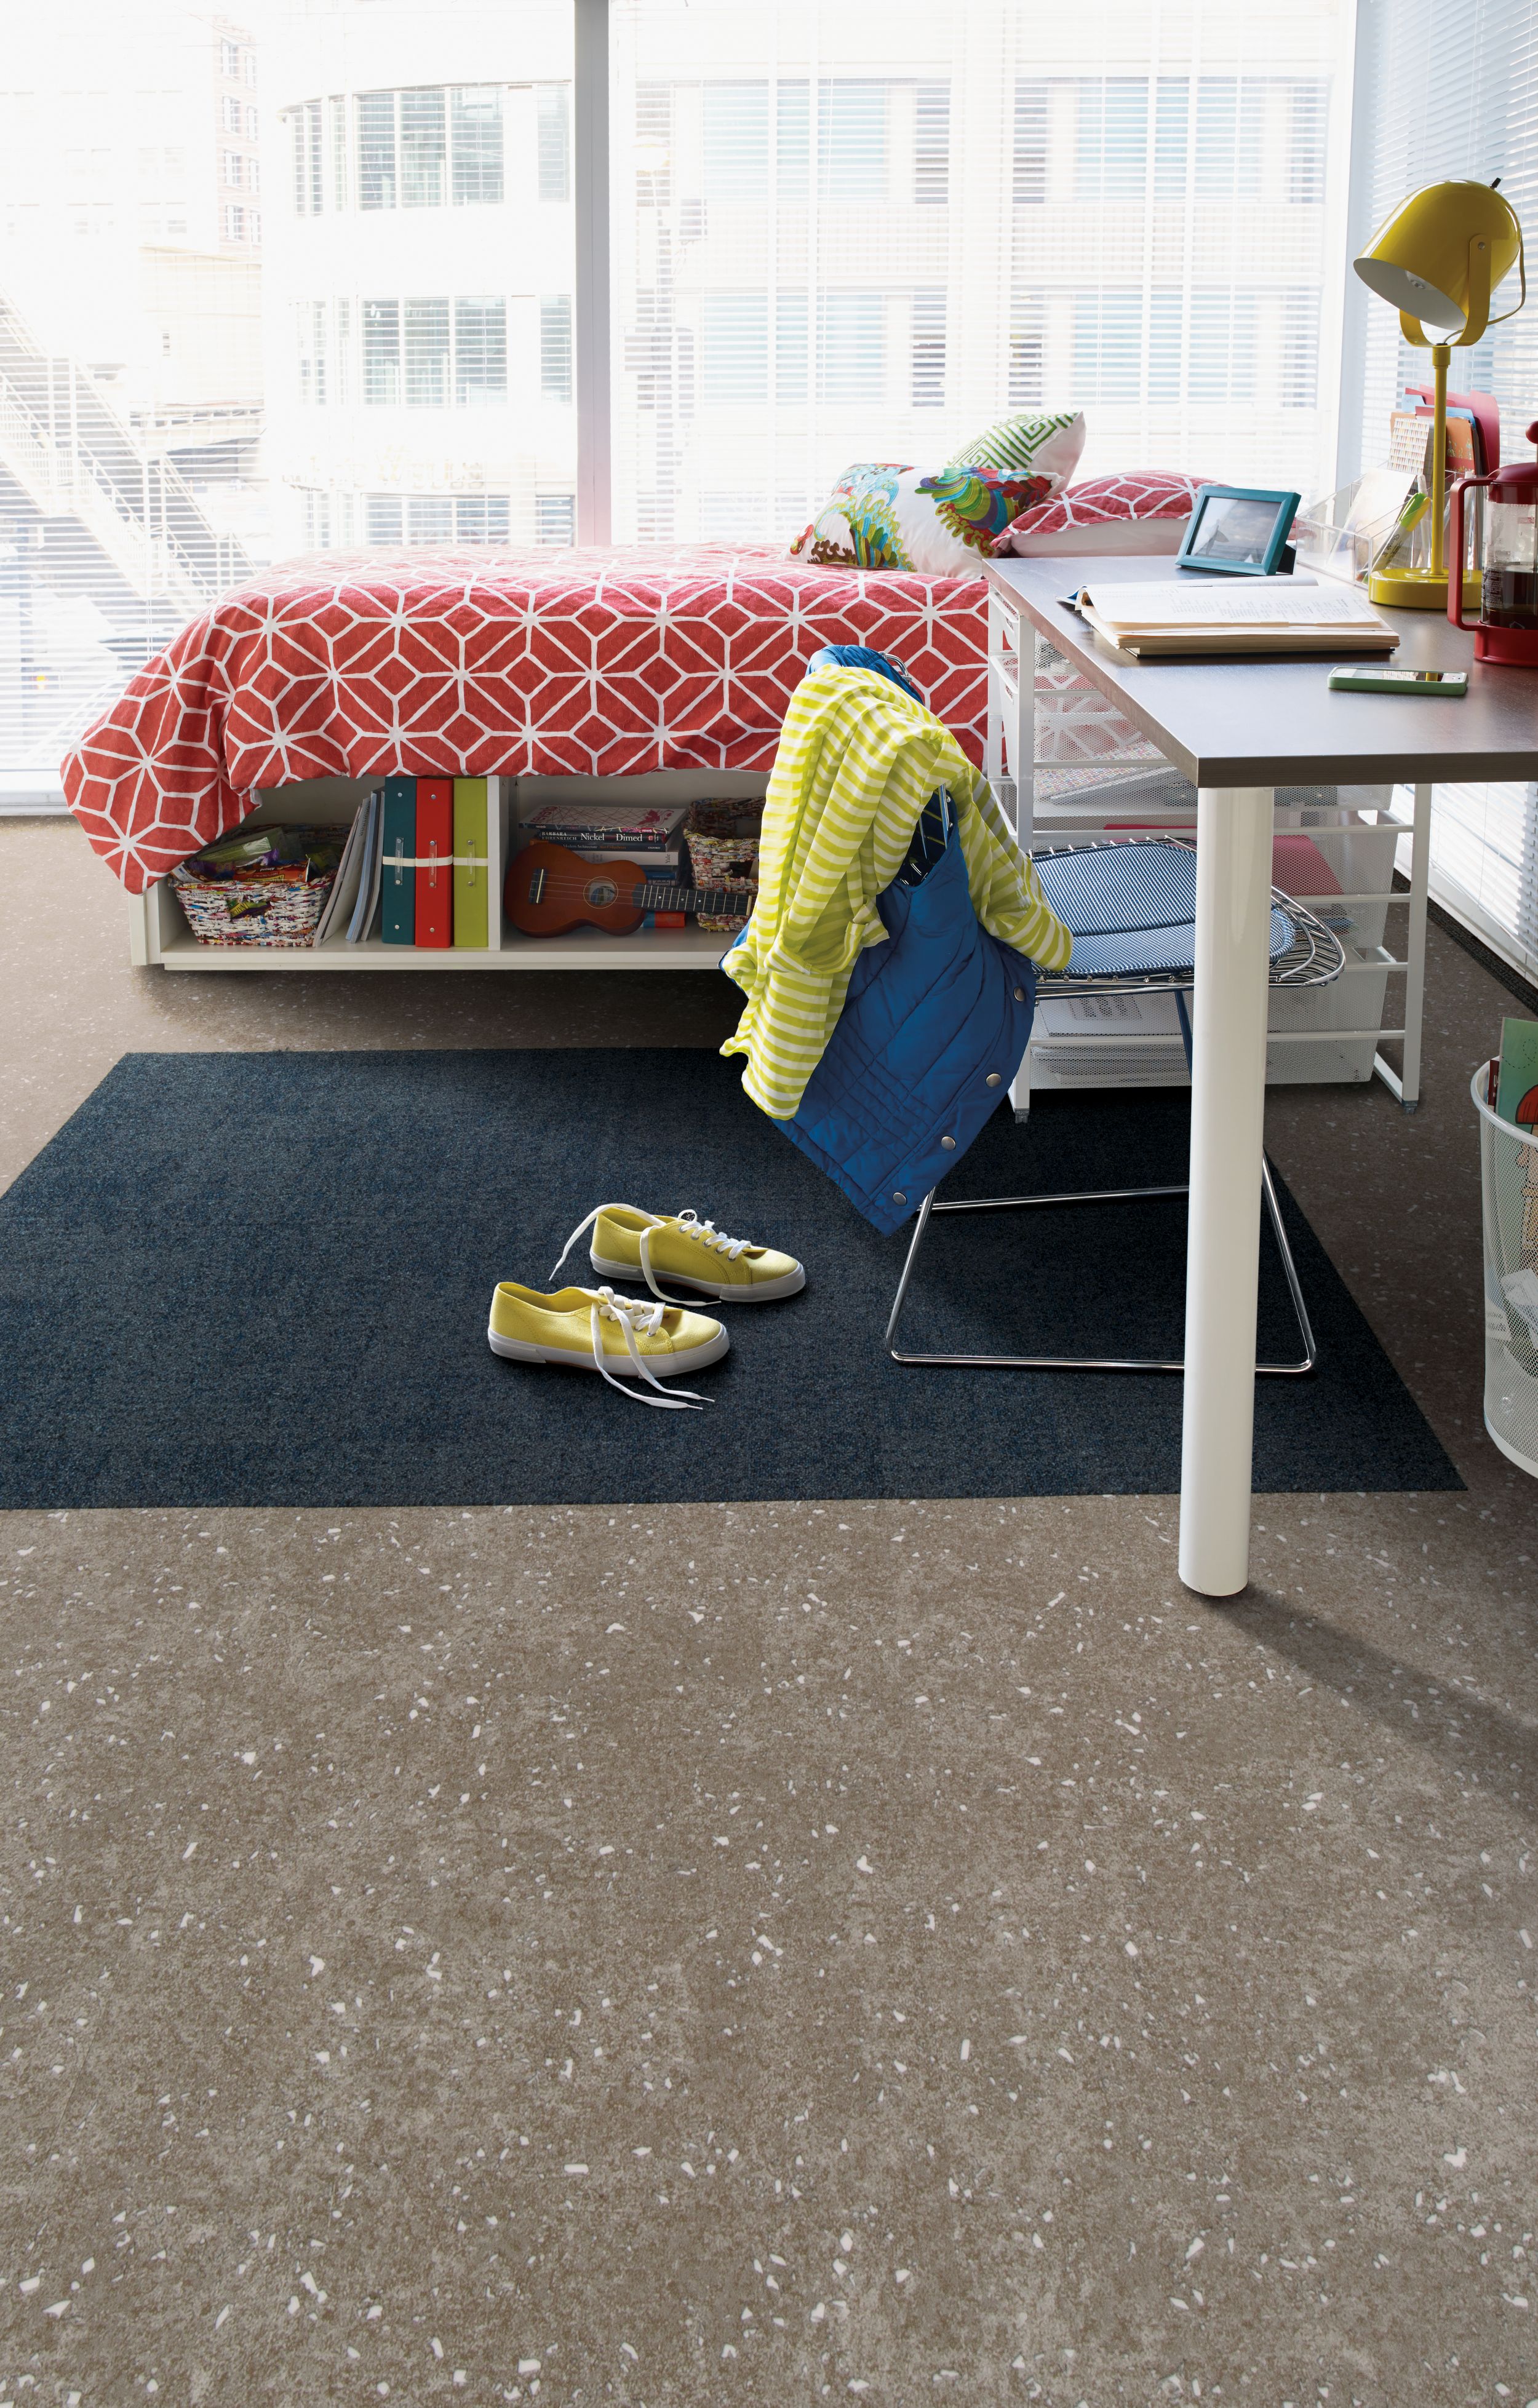 Interface Step in Time carpet tile and Walk the Aisle LVT in a dorm room imagen número 8